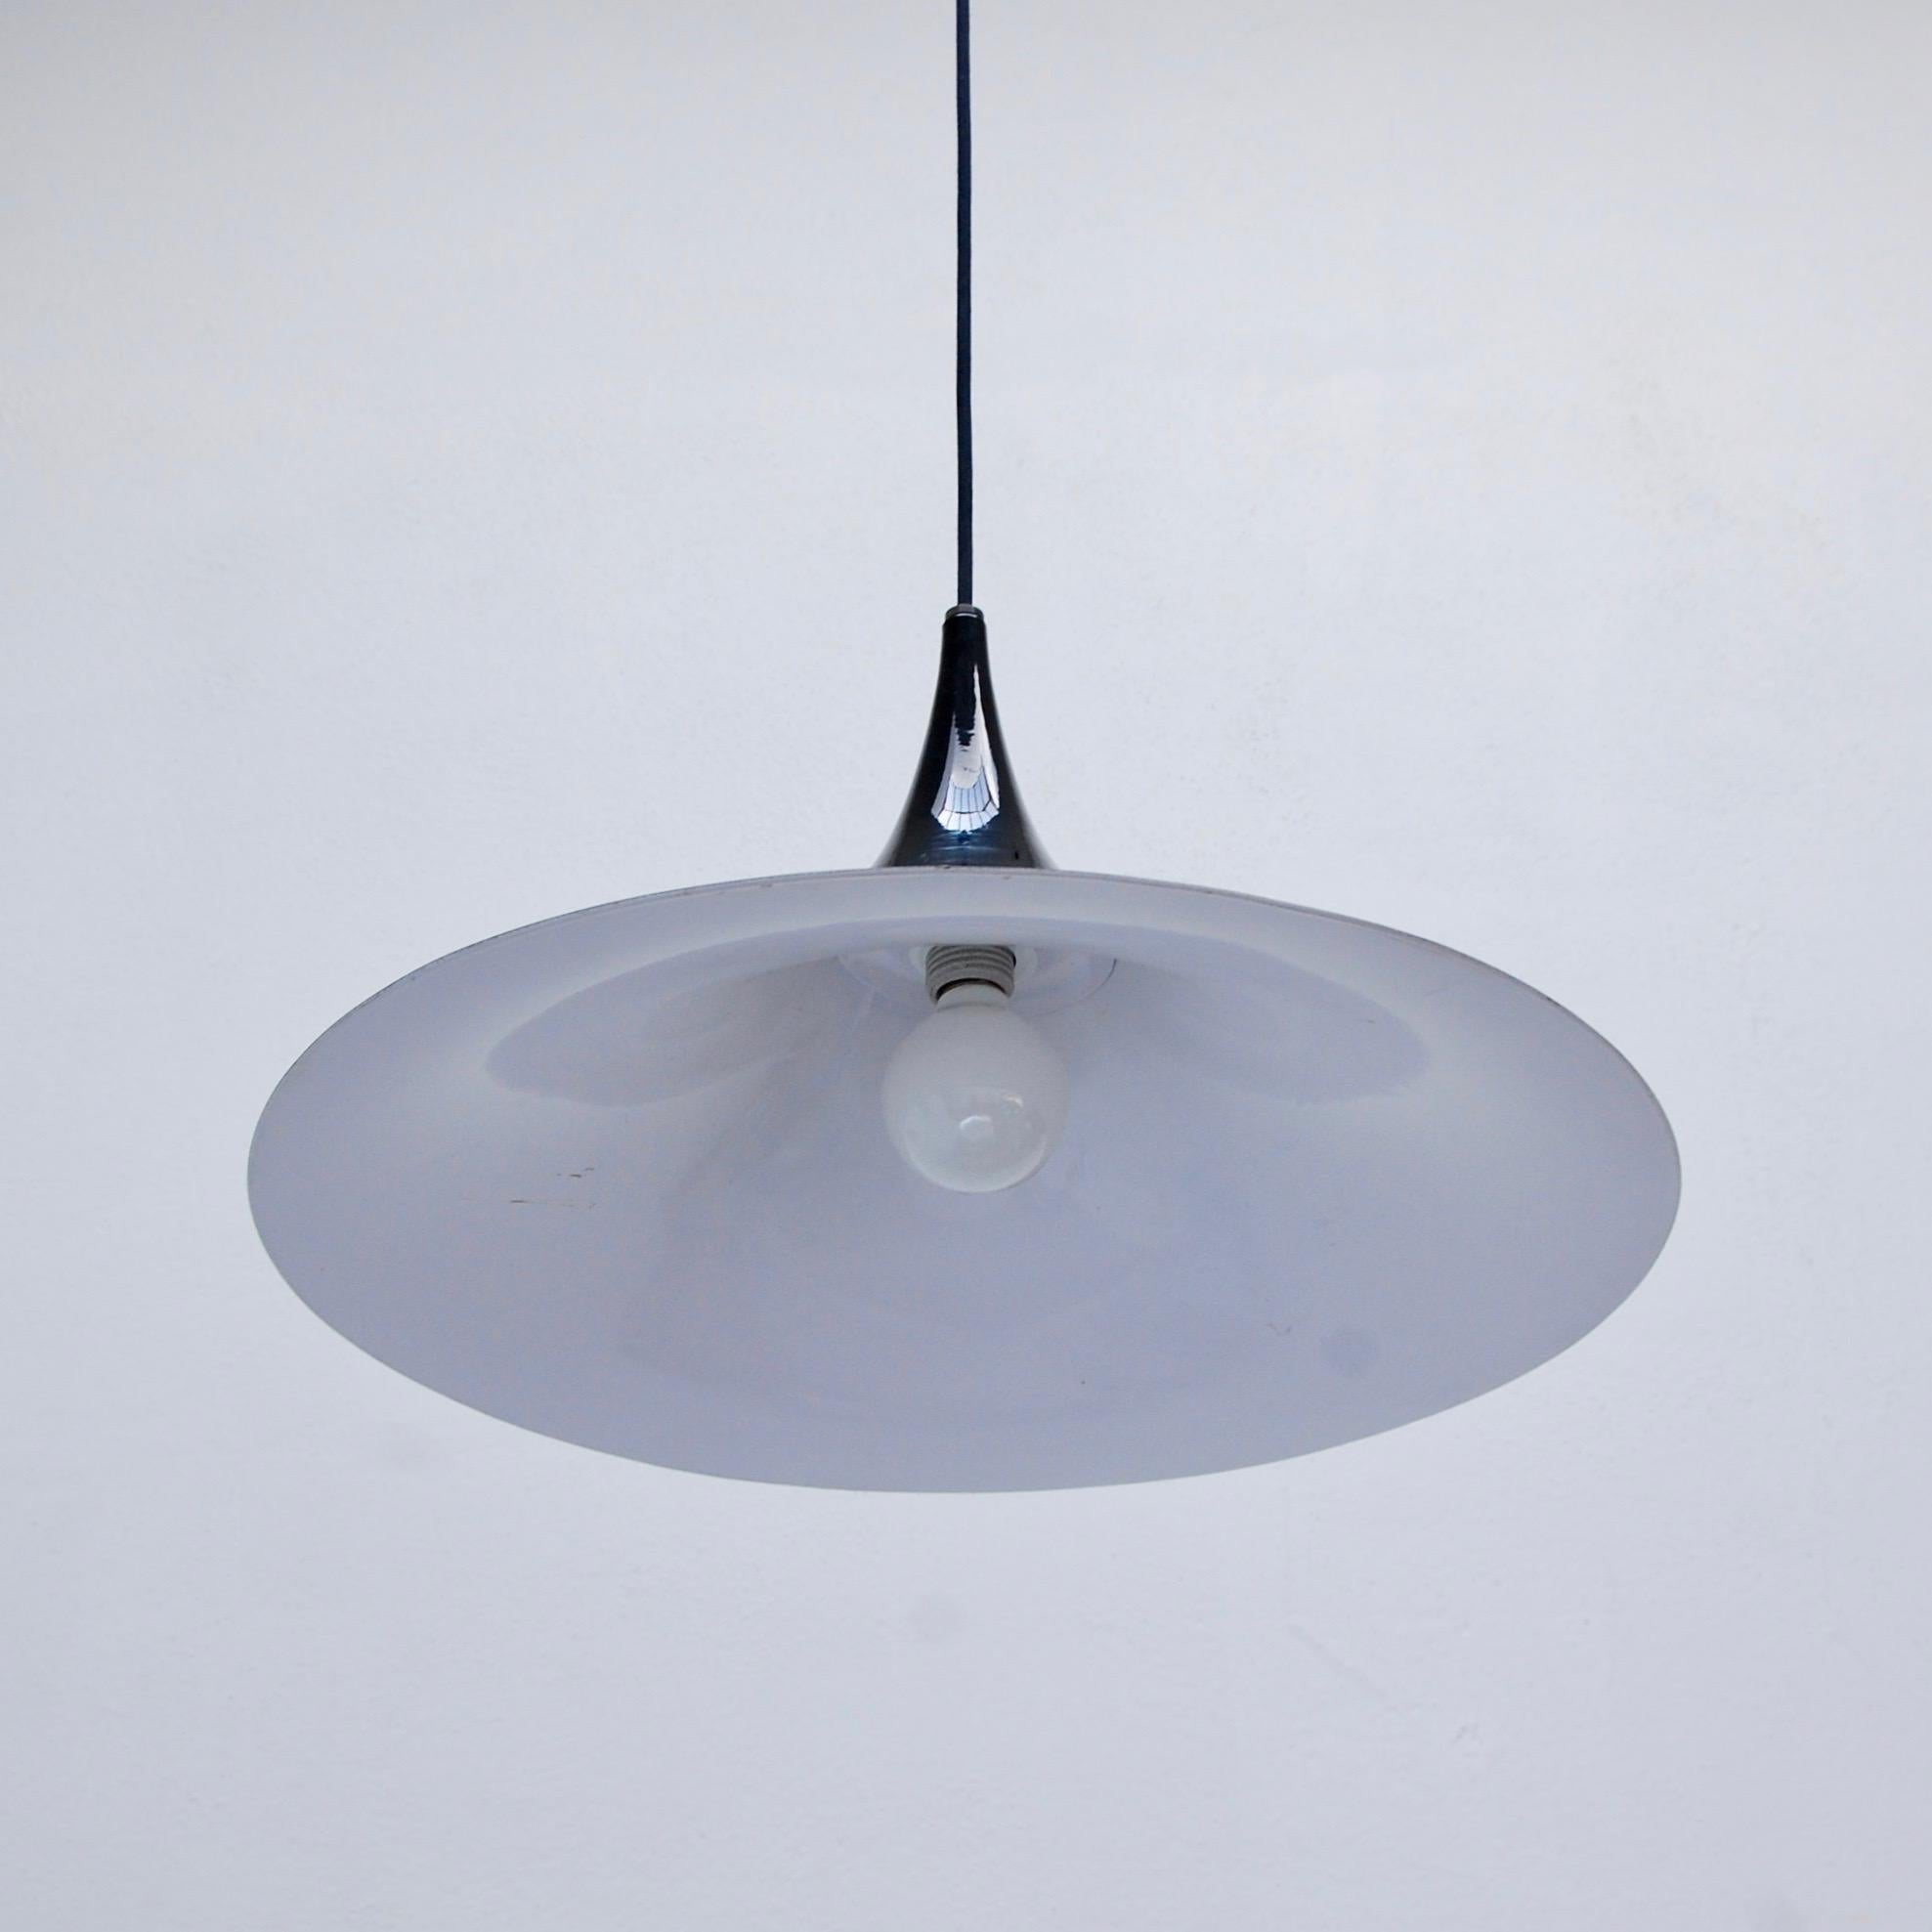 (2) Black Fog & Morup style pendants from Denmark. Original finish. Wired with a single E26 medium based socket for the US. Light bulb included. Overall drop adjustable upon request. Priced individually.
Measurements:
OAD 60”
Fixture height